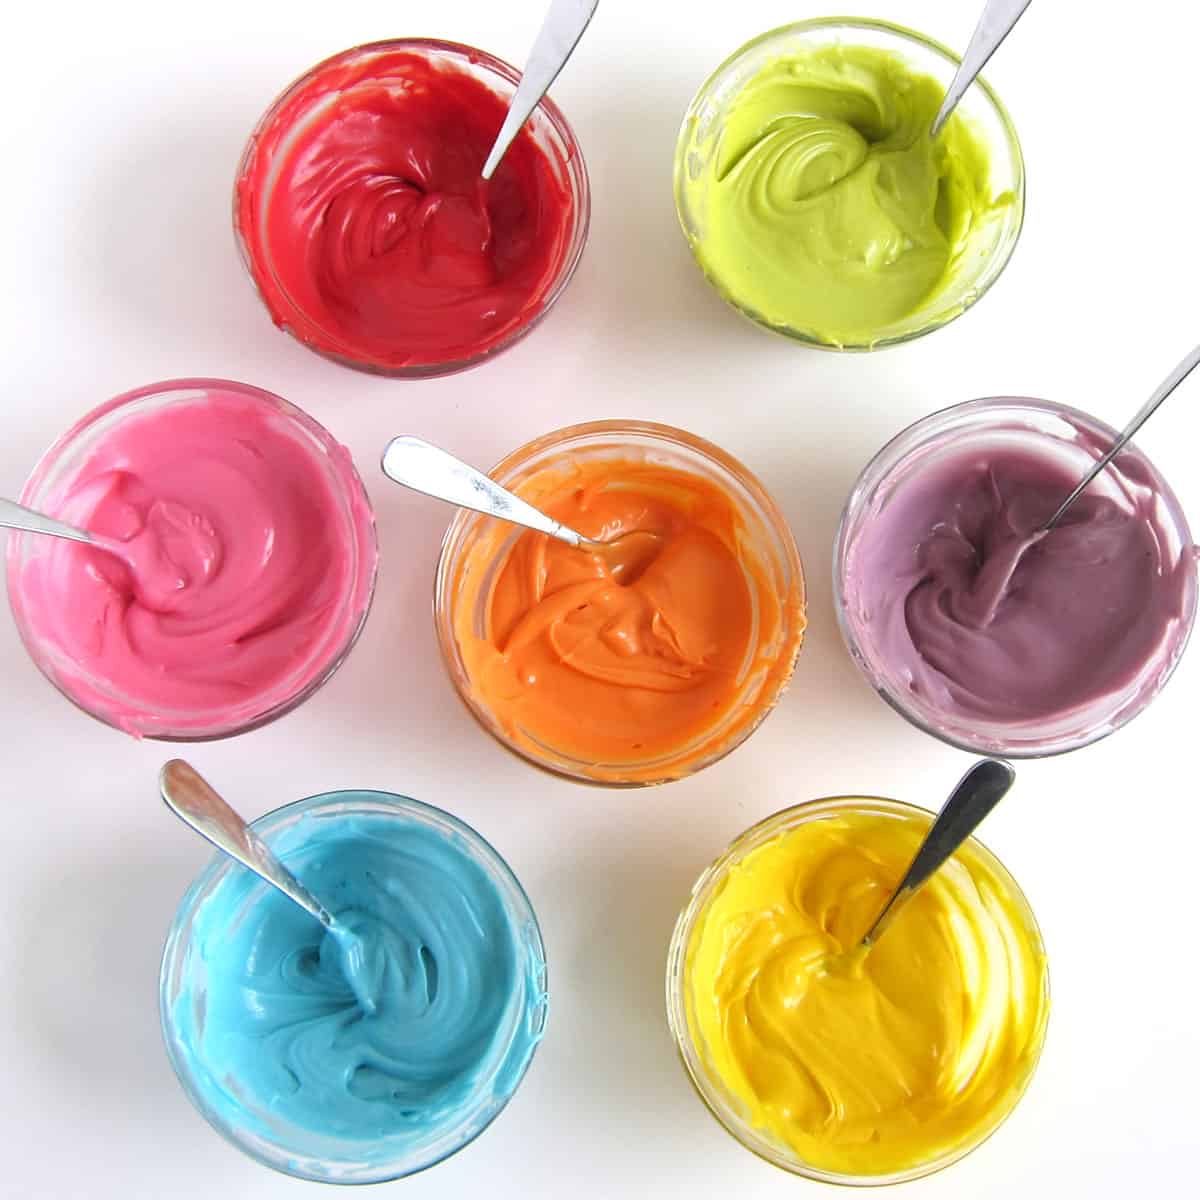 melted colored candy melts in ramekins.